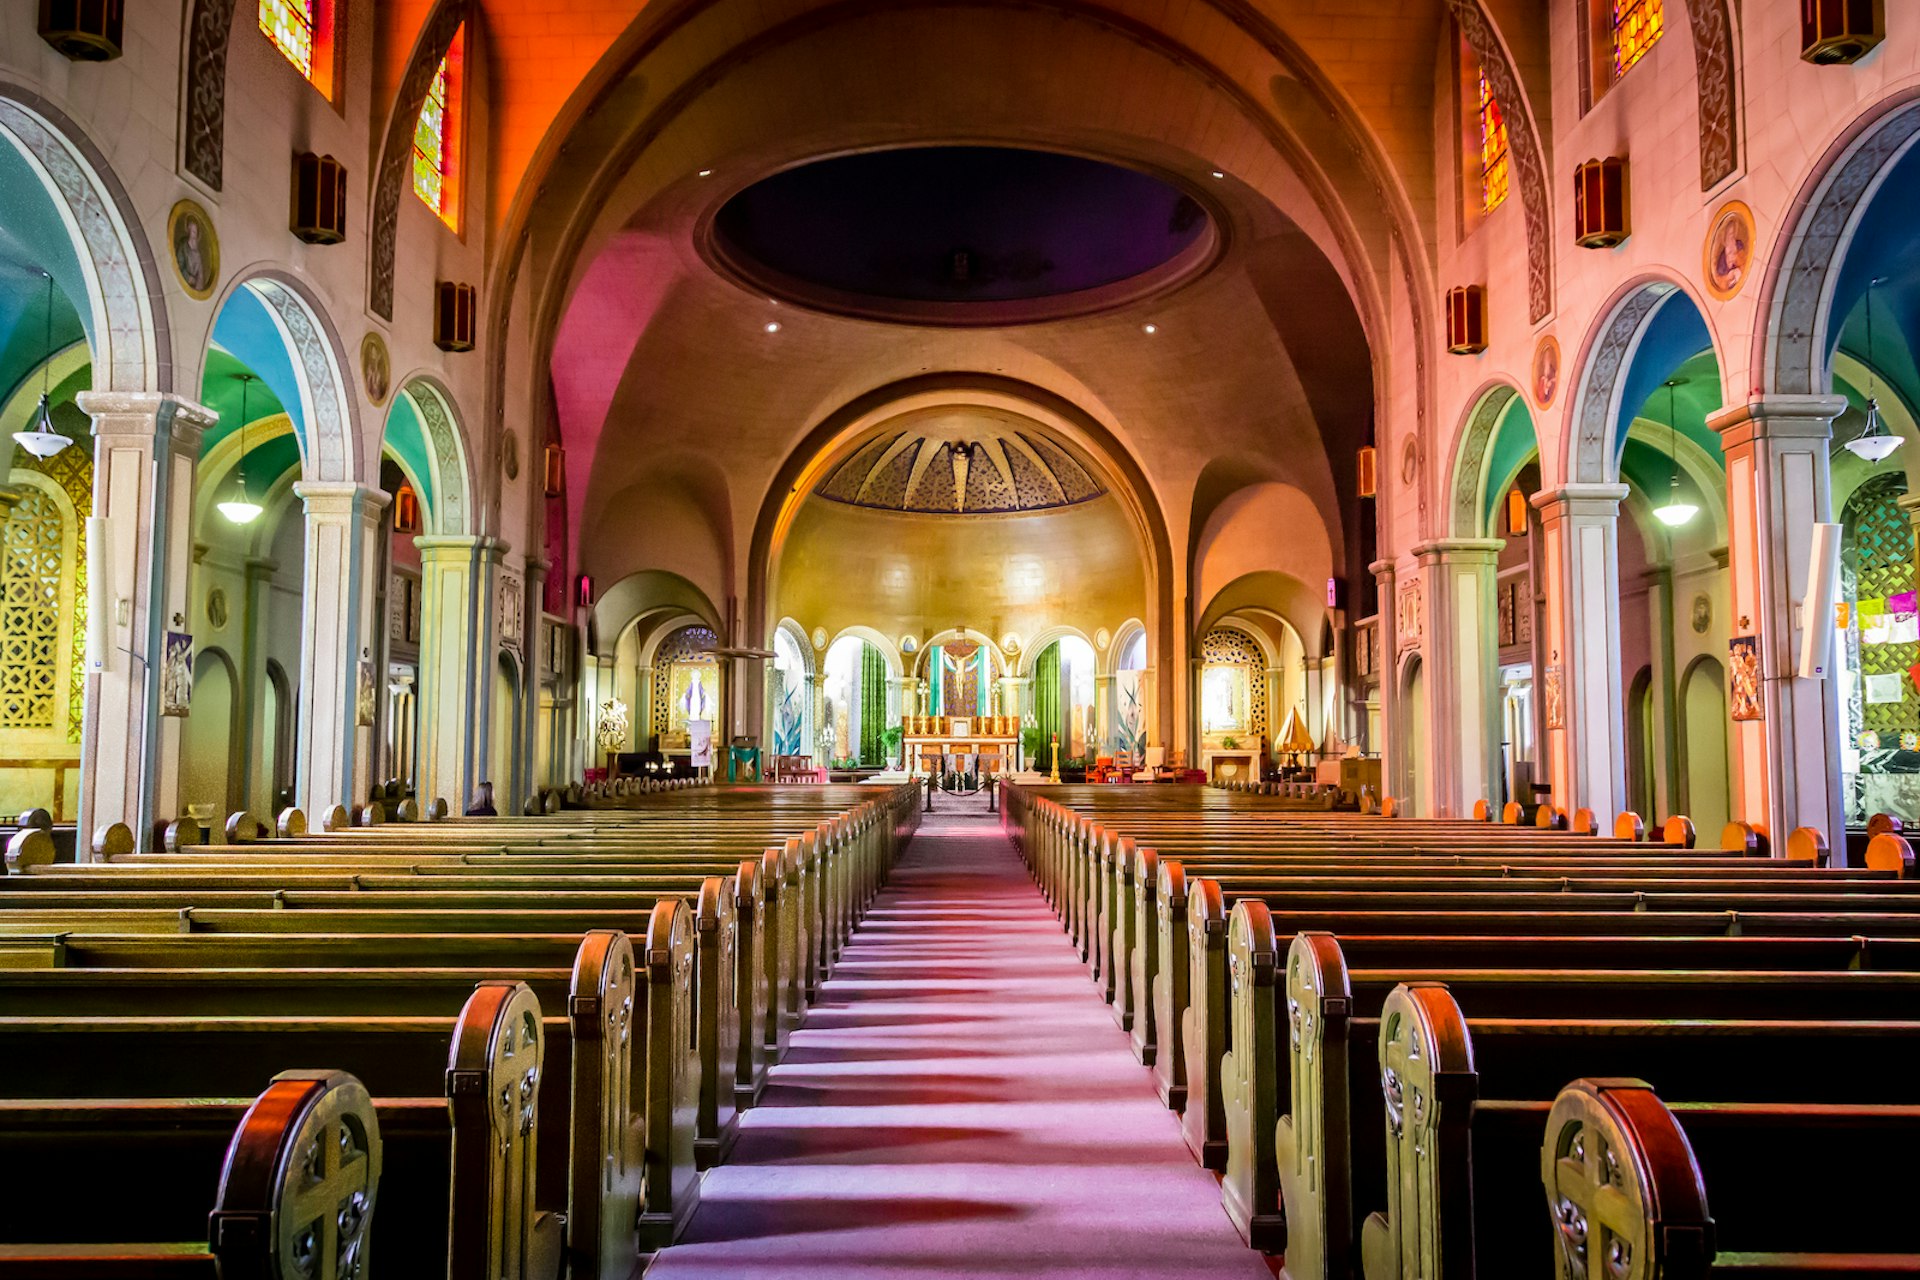 Inside the basilica in San Francisco's Mission